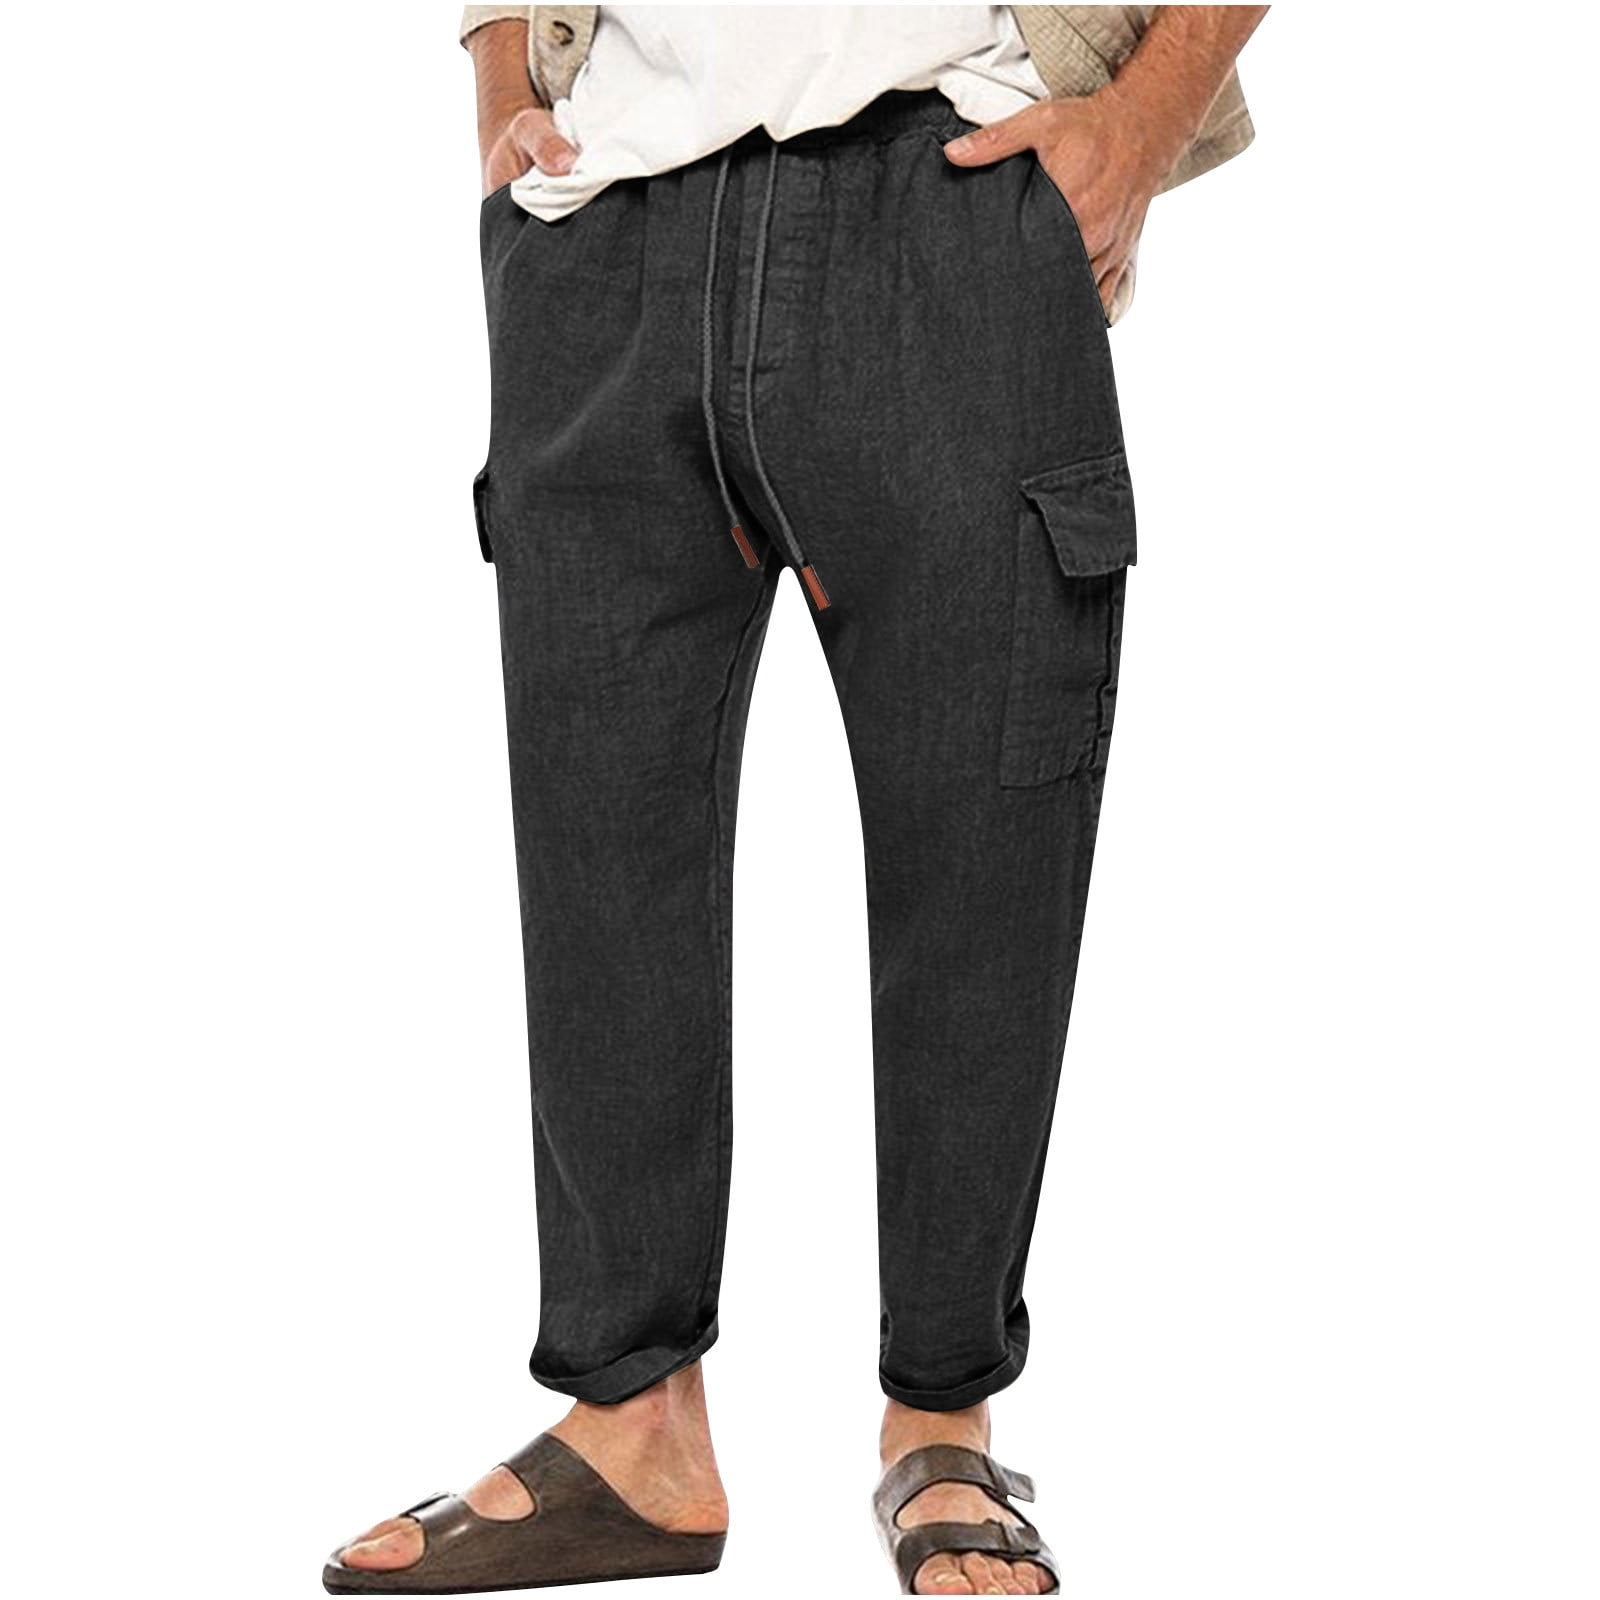 Giftesty Mens Cargo Pants Clearance Men's Cotton Linen Trousers with ...